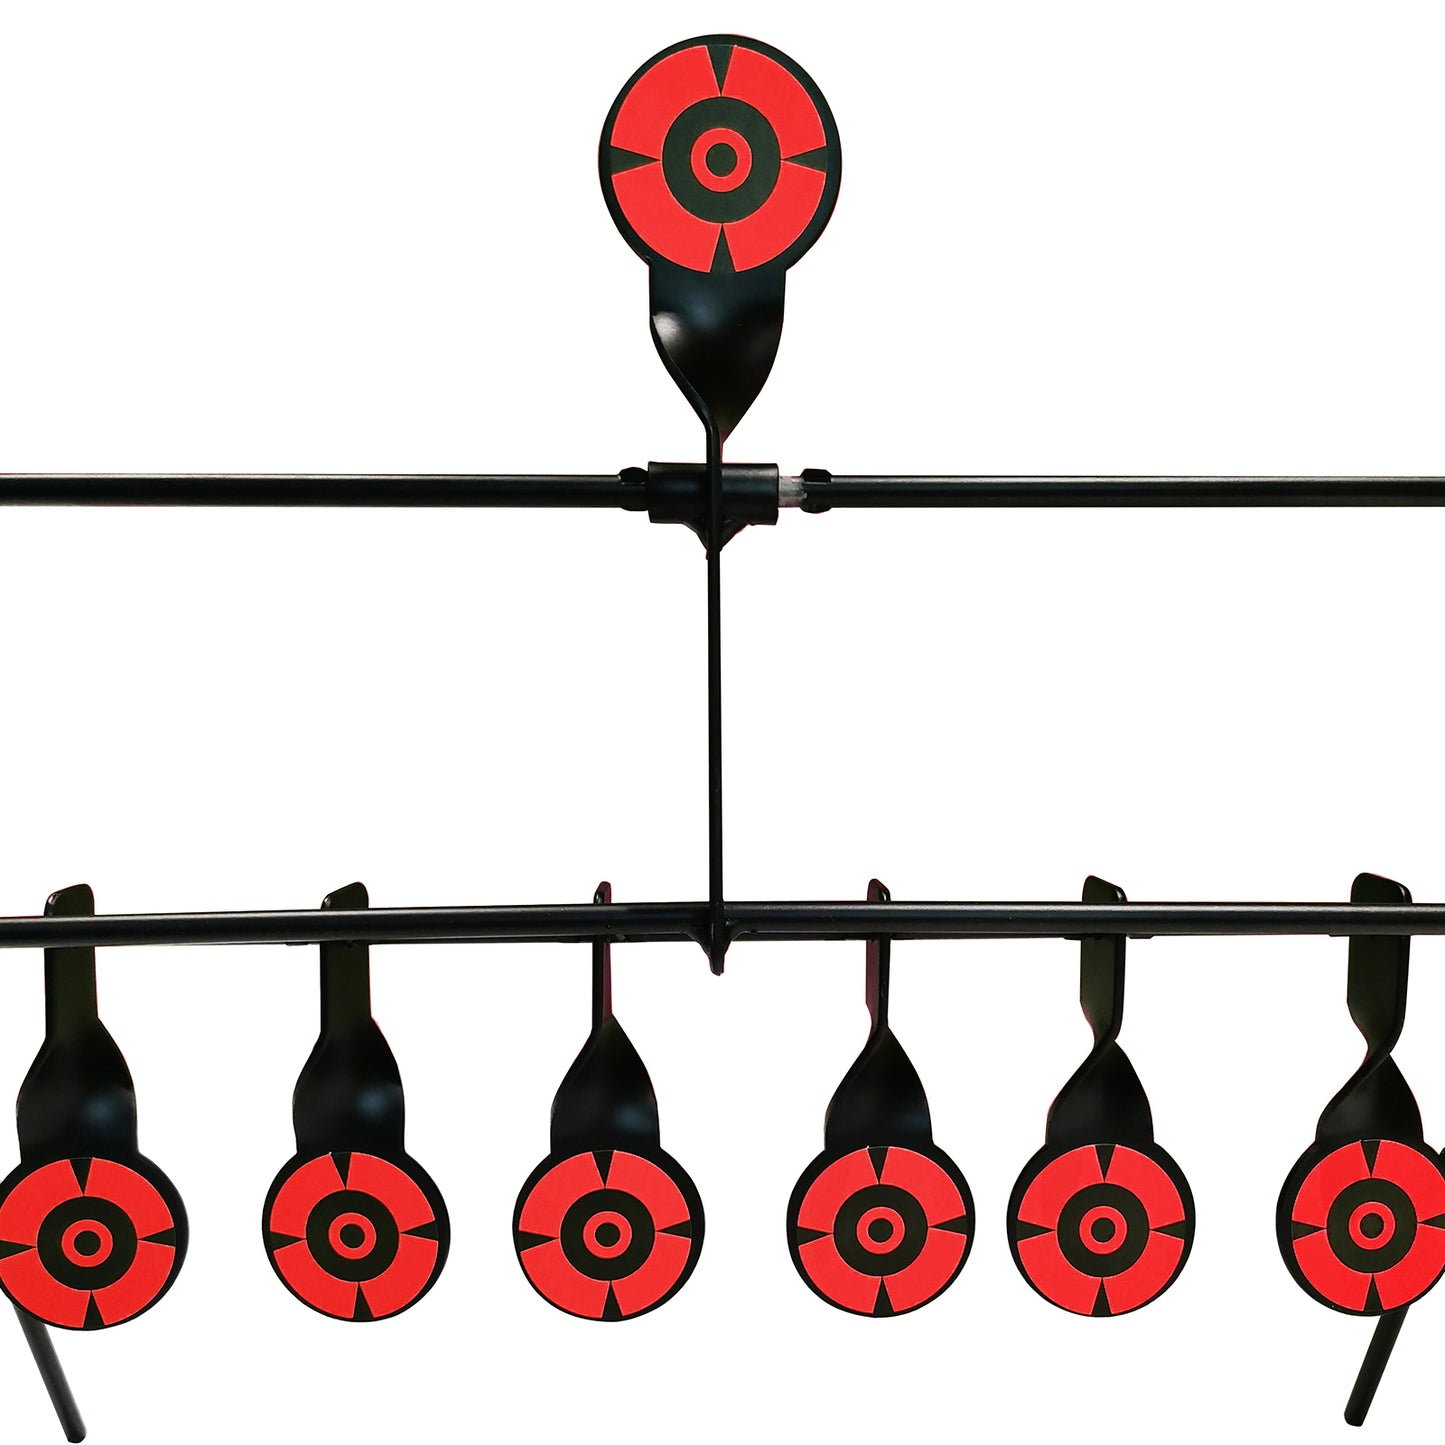 Atflbox Resetting Targets for Airgun Pellet BB Guns,6 Steel Targets for Shooting , Rated for .177 Caliber